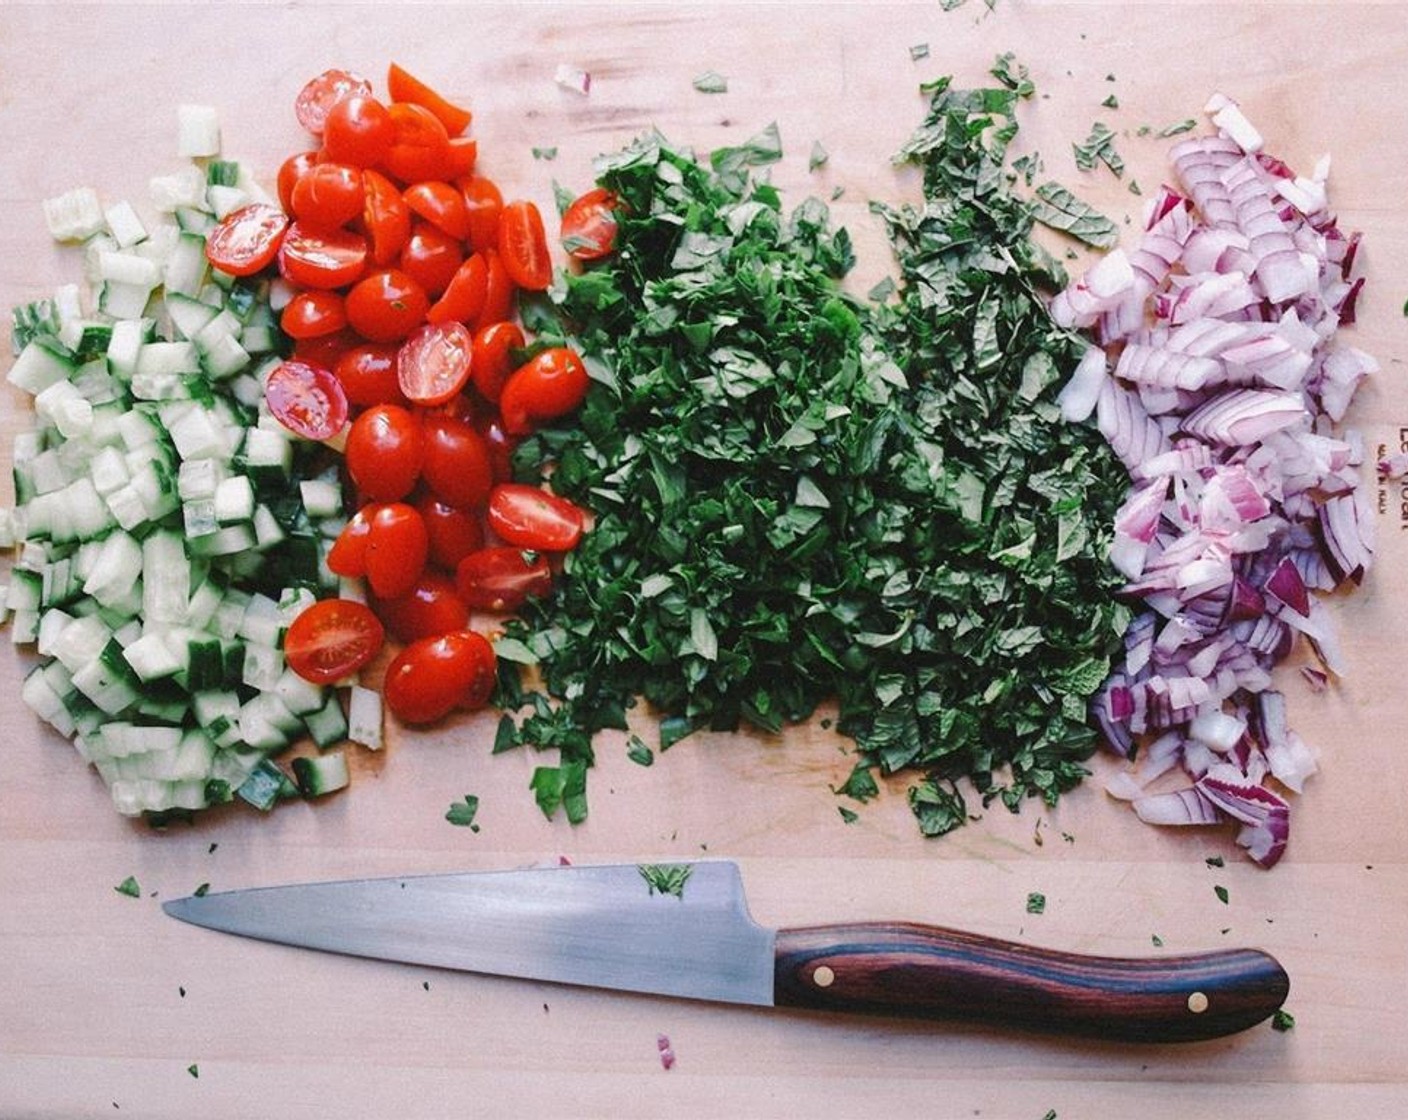 step 3 In the meantime, finely chop your Fresh Parsley (2 cups) and Fresh Mint Leaves (1 cup). Dice your English Cucumber (1), Red Onion (1) and halve the Grape Tomatoes (1 1/2 cups).